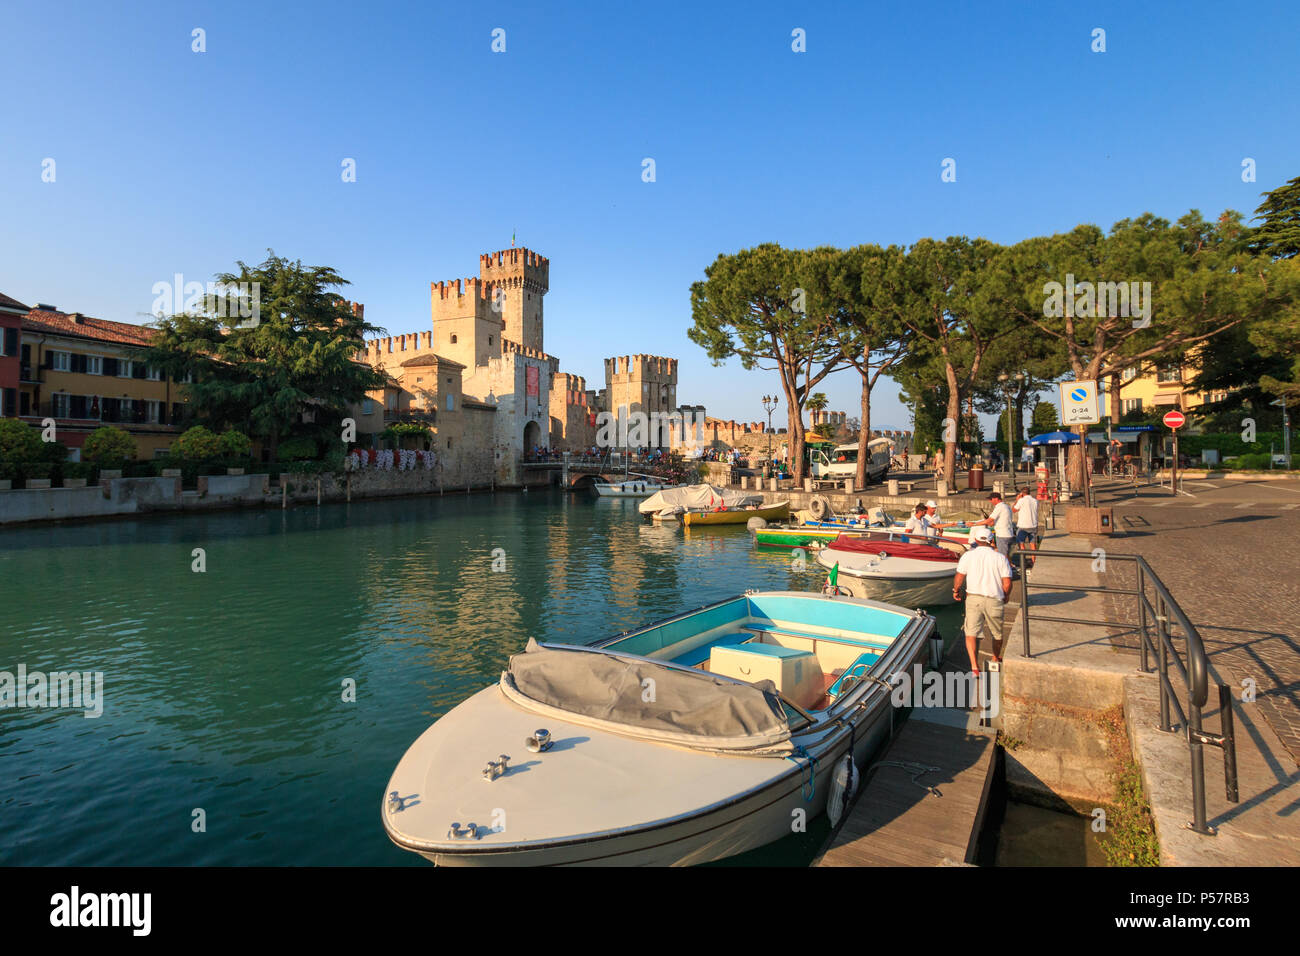 Sirmione, Italy – May 27, 2017: Scaliger castle in the old town of Sirmione at Lake Garda seen from touristic harbor Stock Photo